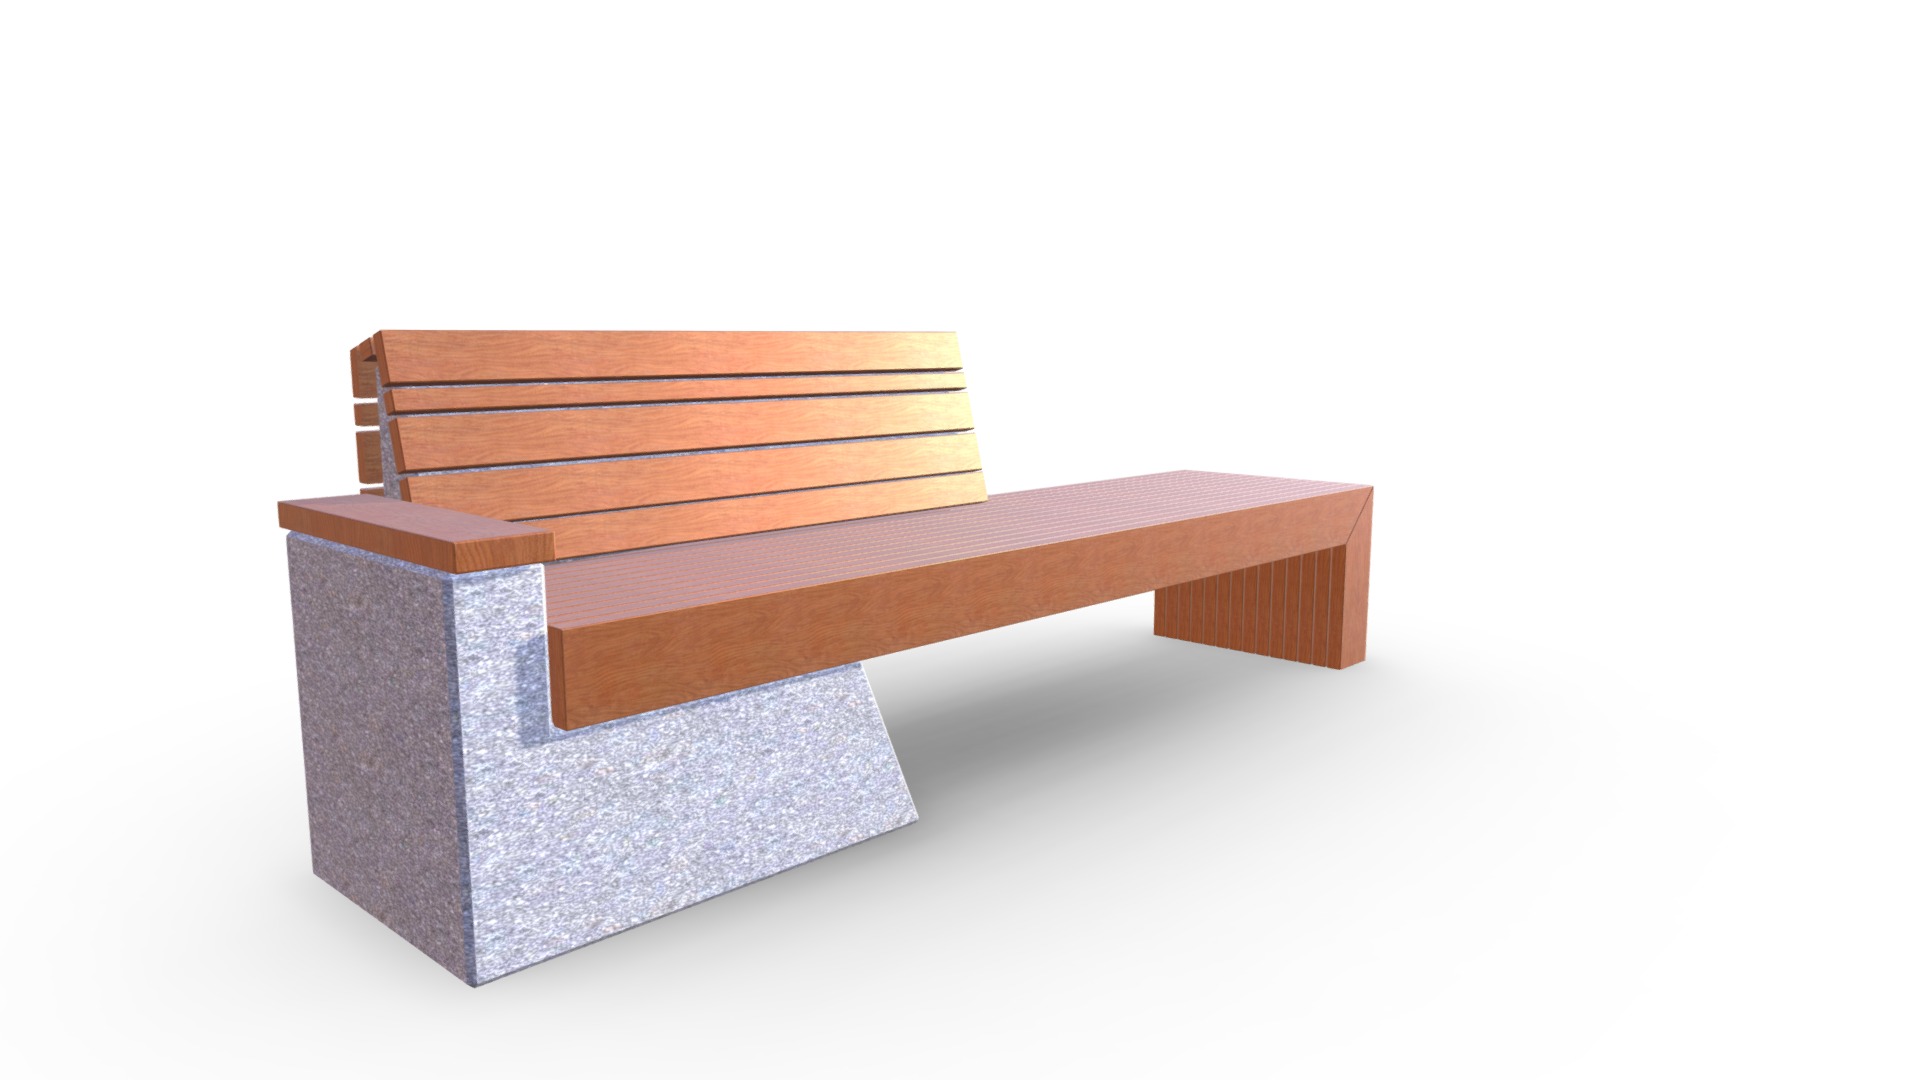 3D model Kolekcija 2 - This is a 3D model of the Kolekcija 2. The 3D model is about a wooden bench with a cushion.